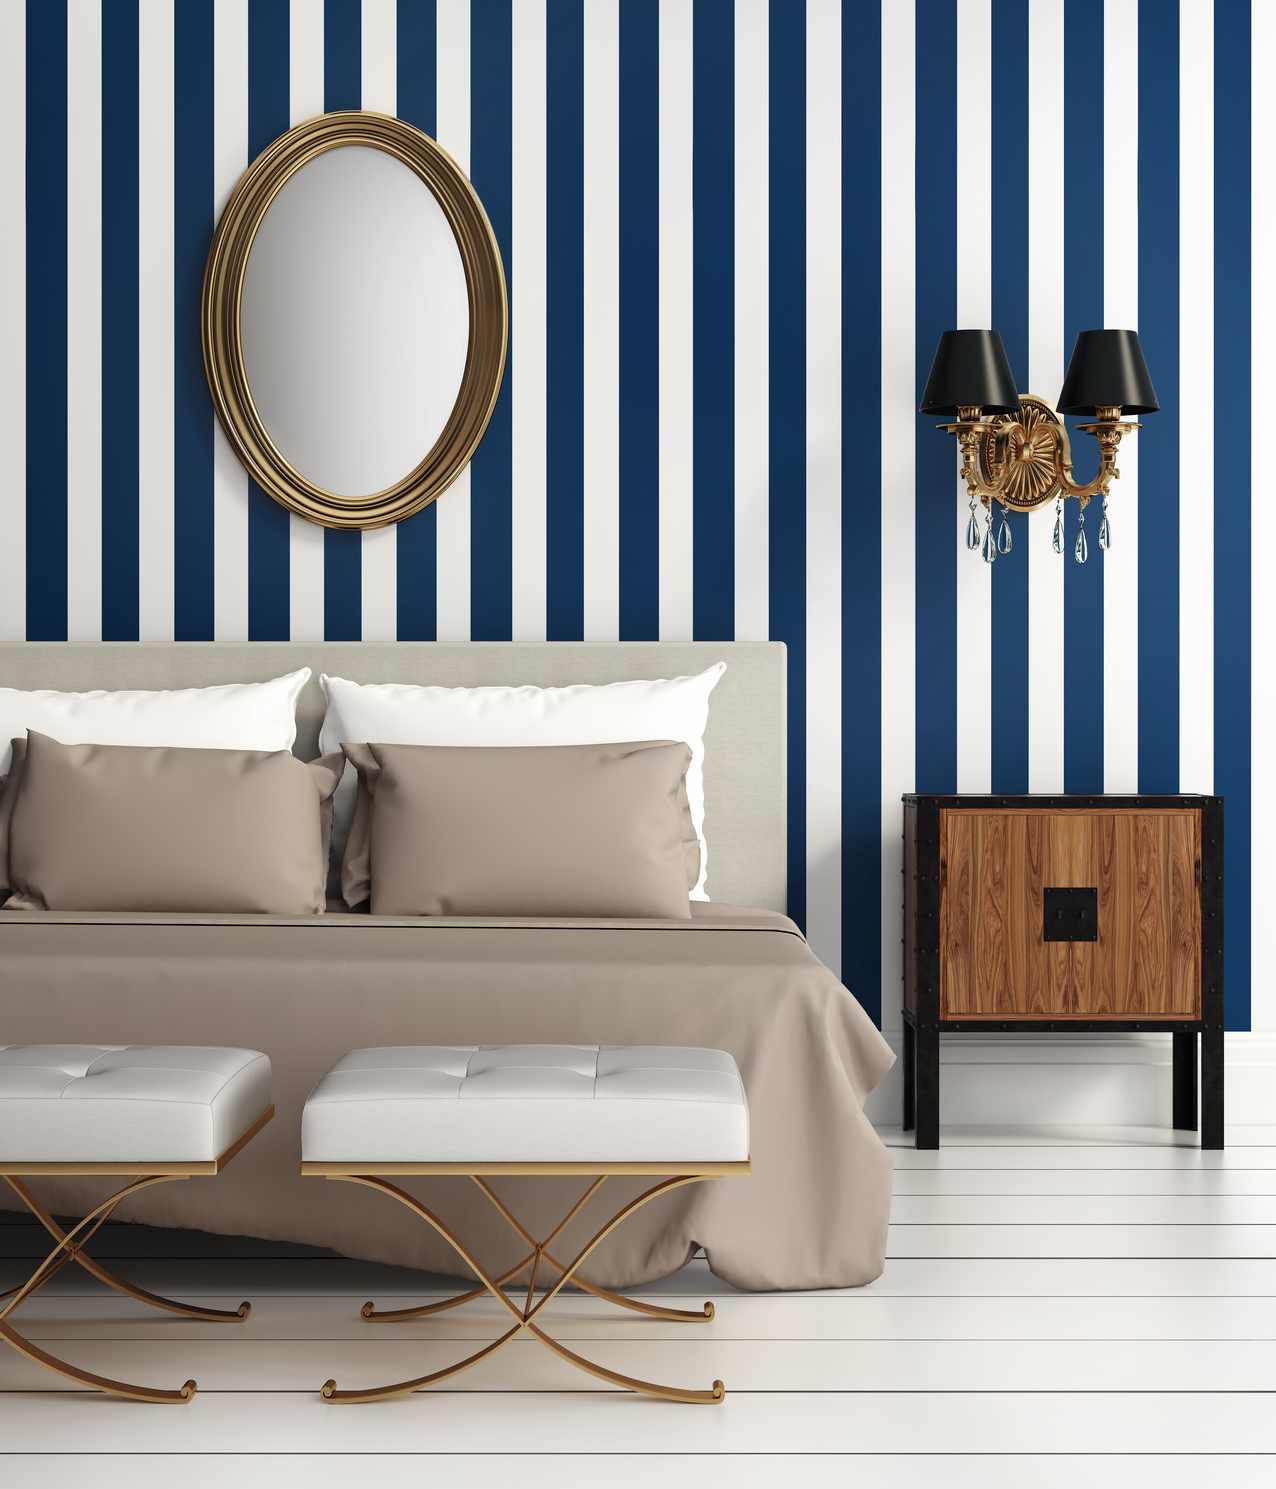 Contemporary elegant luxury bedroom with blue stripes wallpaper